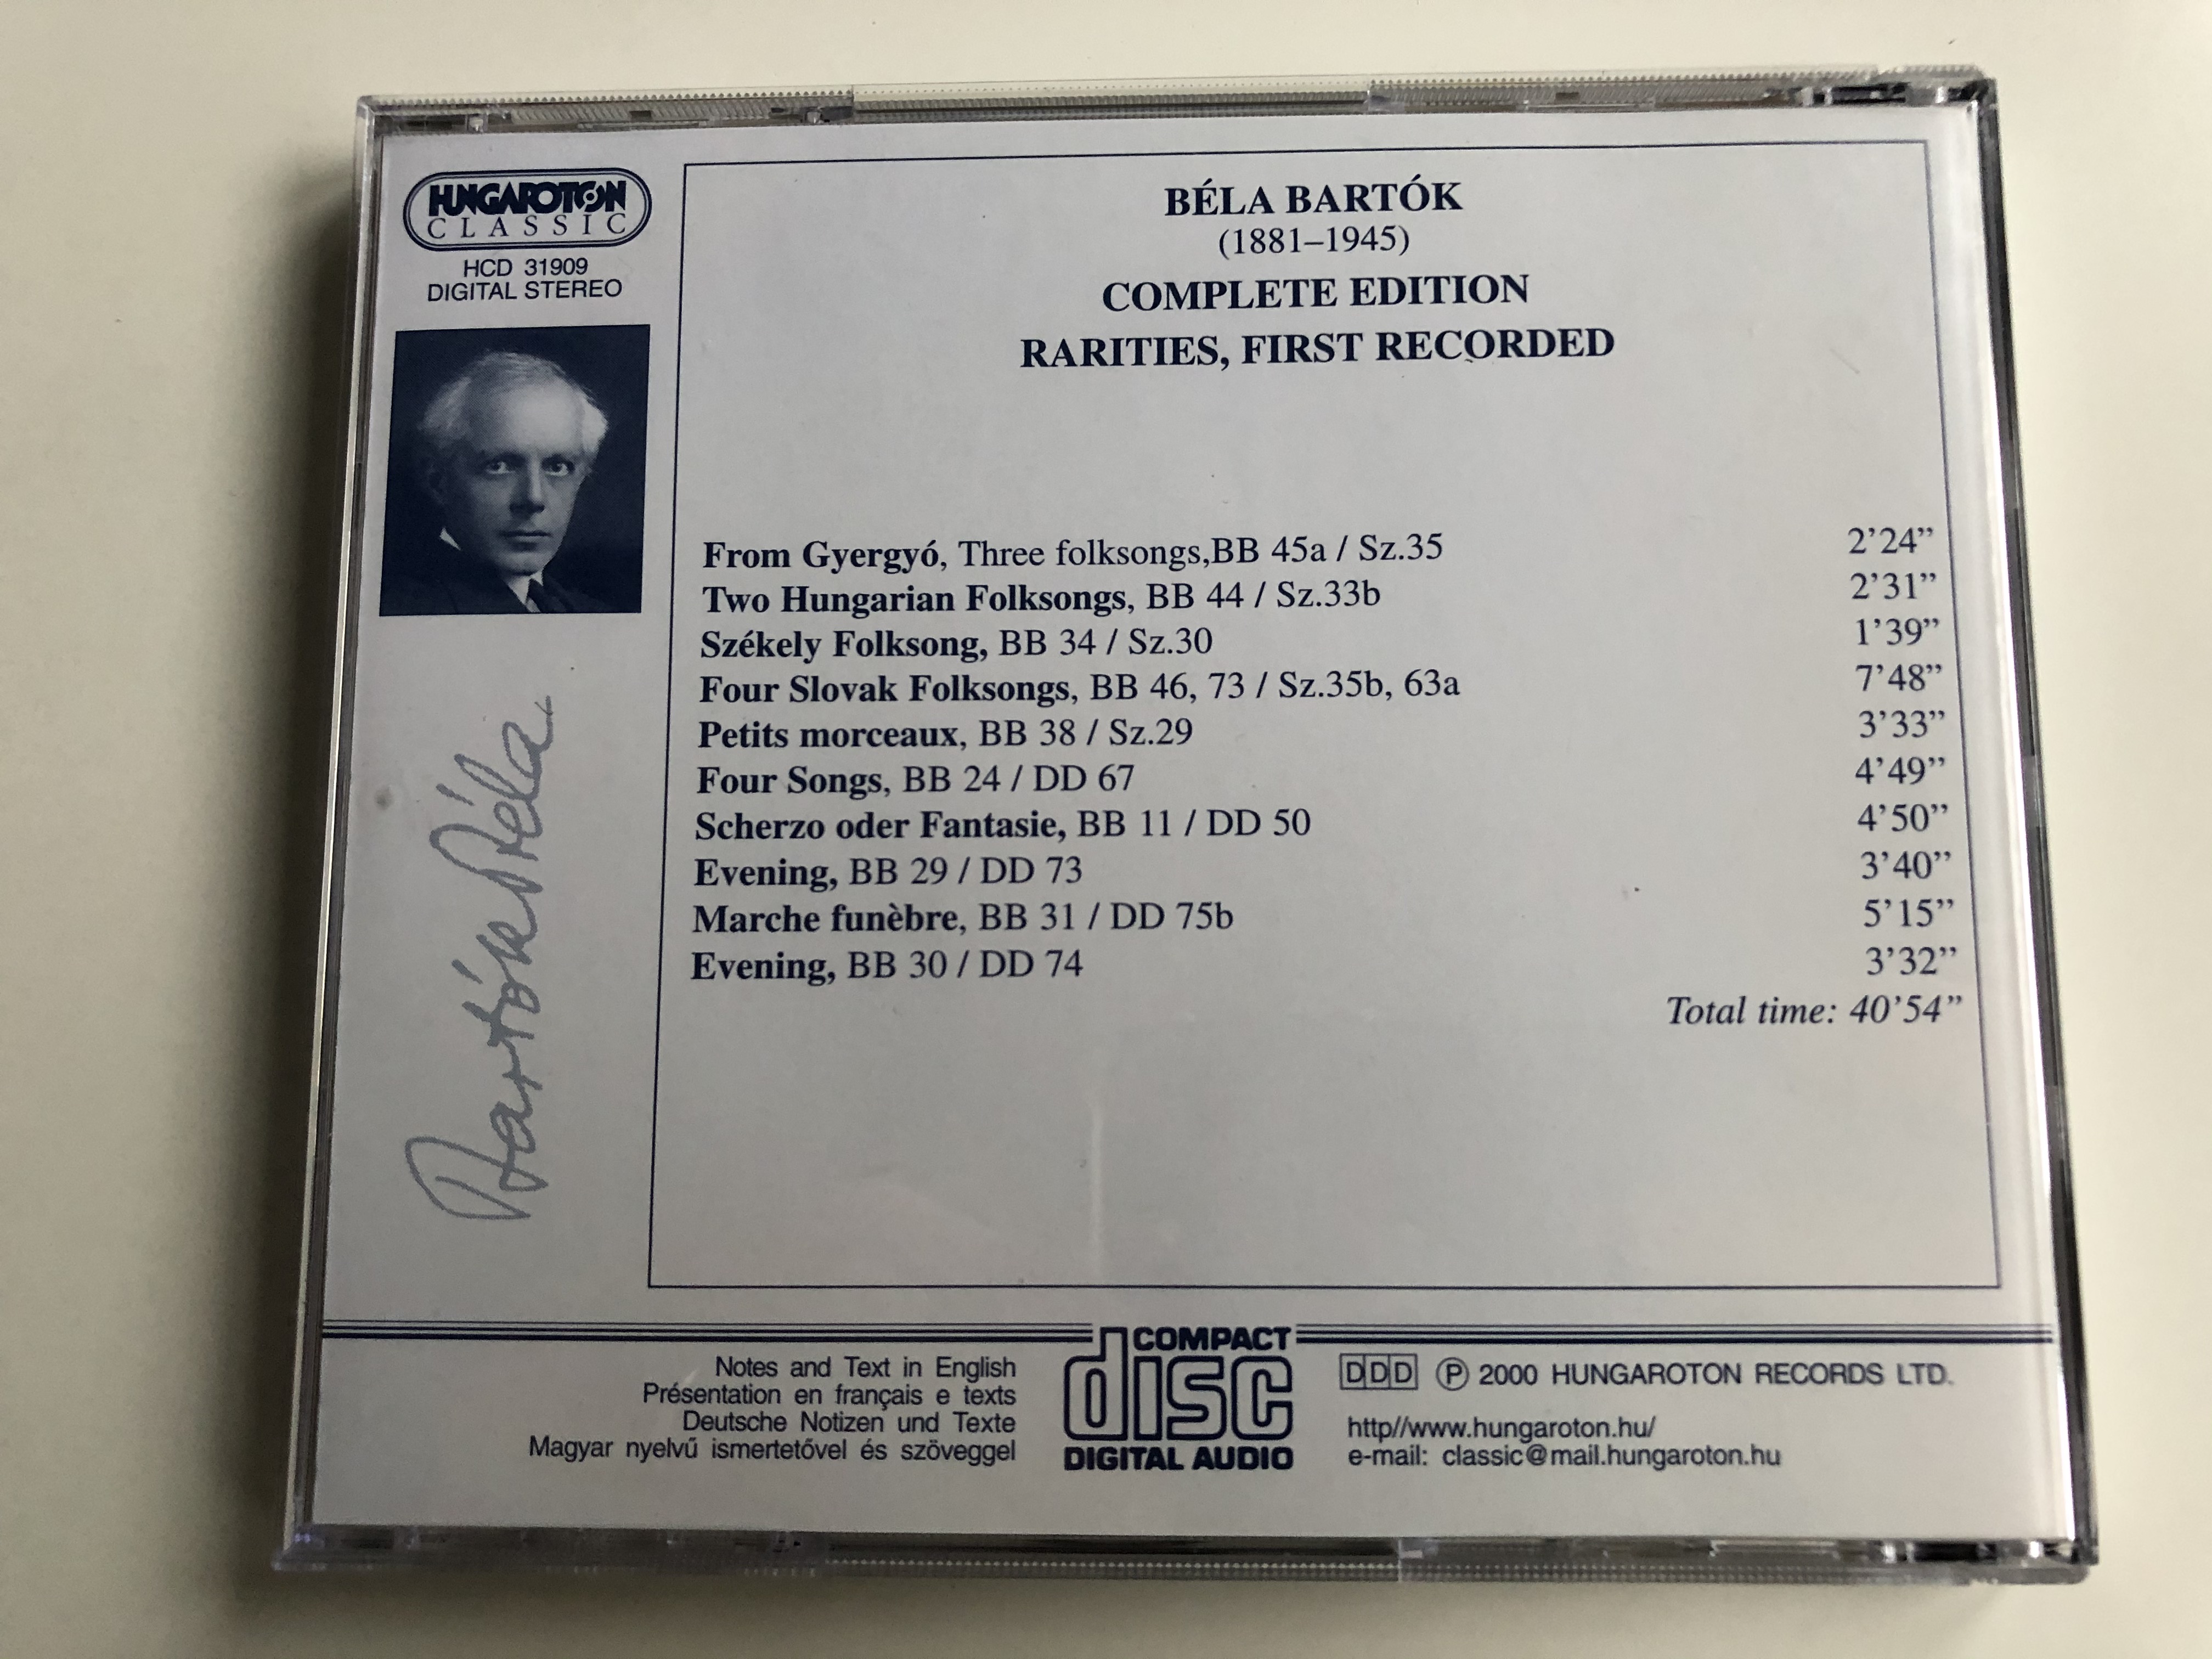 bartok-complete-edition-rapities-from-gyergyo-two-hungarian-folksongs-szeleky-folksong-four-slovak-folksongs-petits-morceaux-four-songs-scherzo-oder-fantasie-hungaroton-classic-audio-cd-15-.jpg